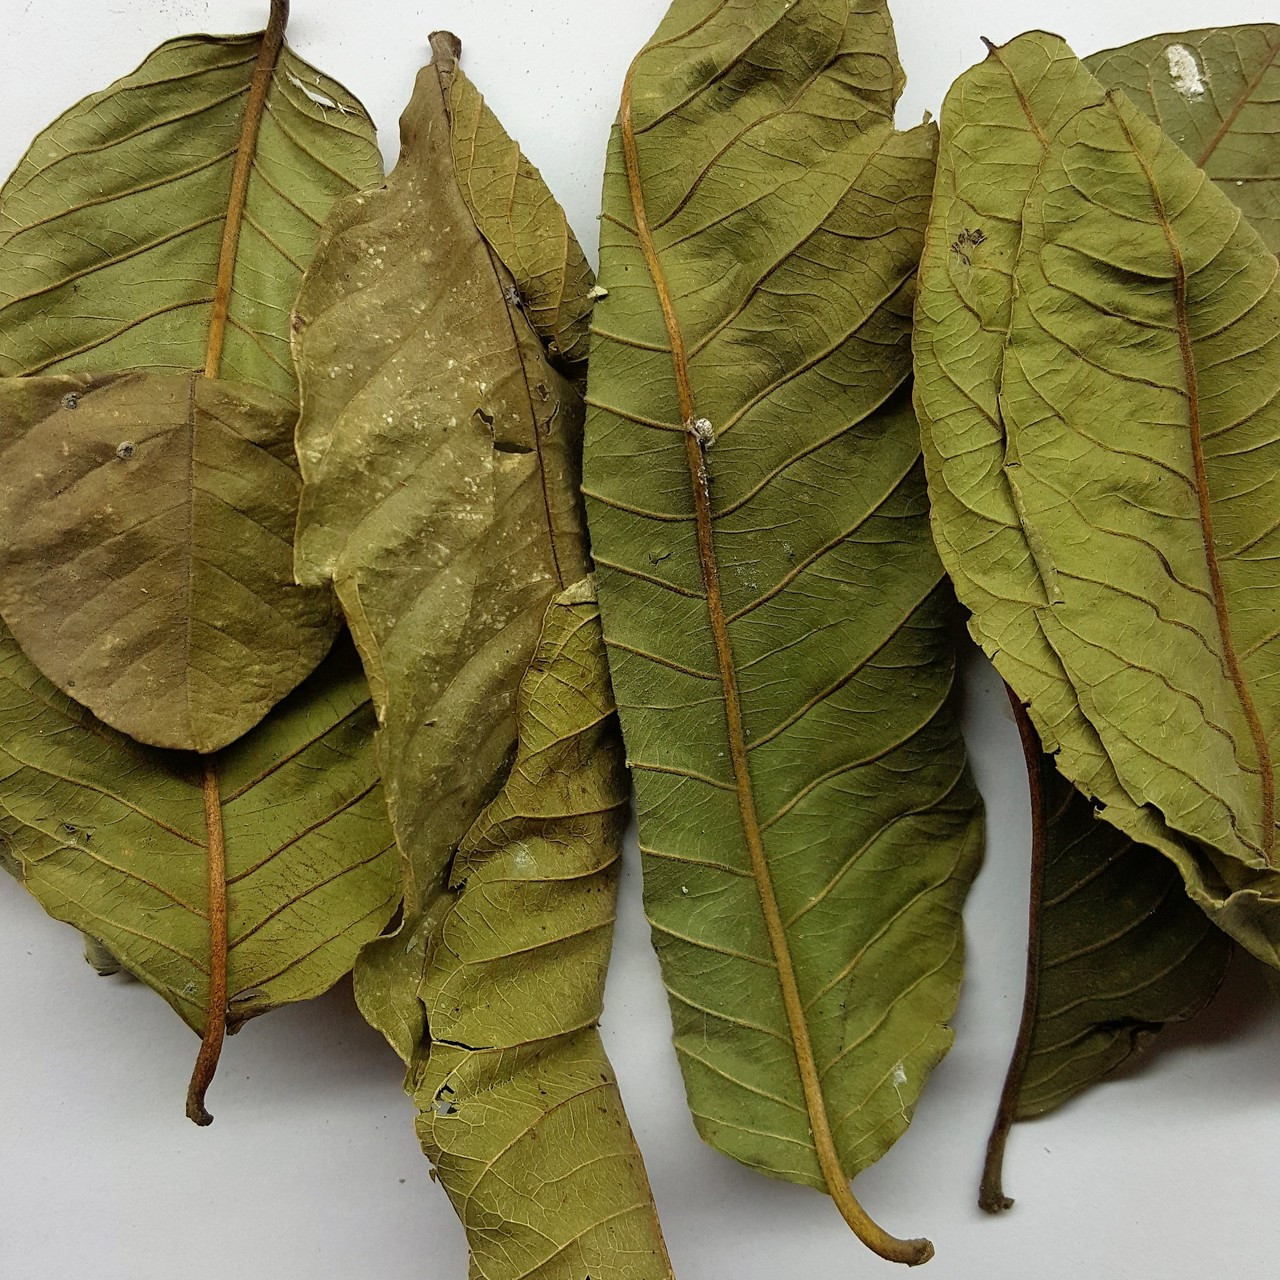 Guava Leaves - [Blood & Heart Health][Digestive Health][Menstrual Relief]